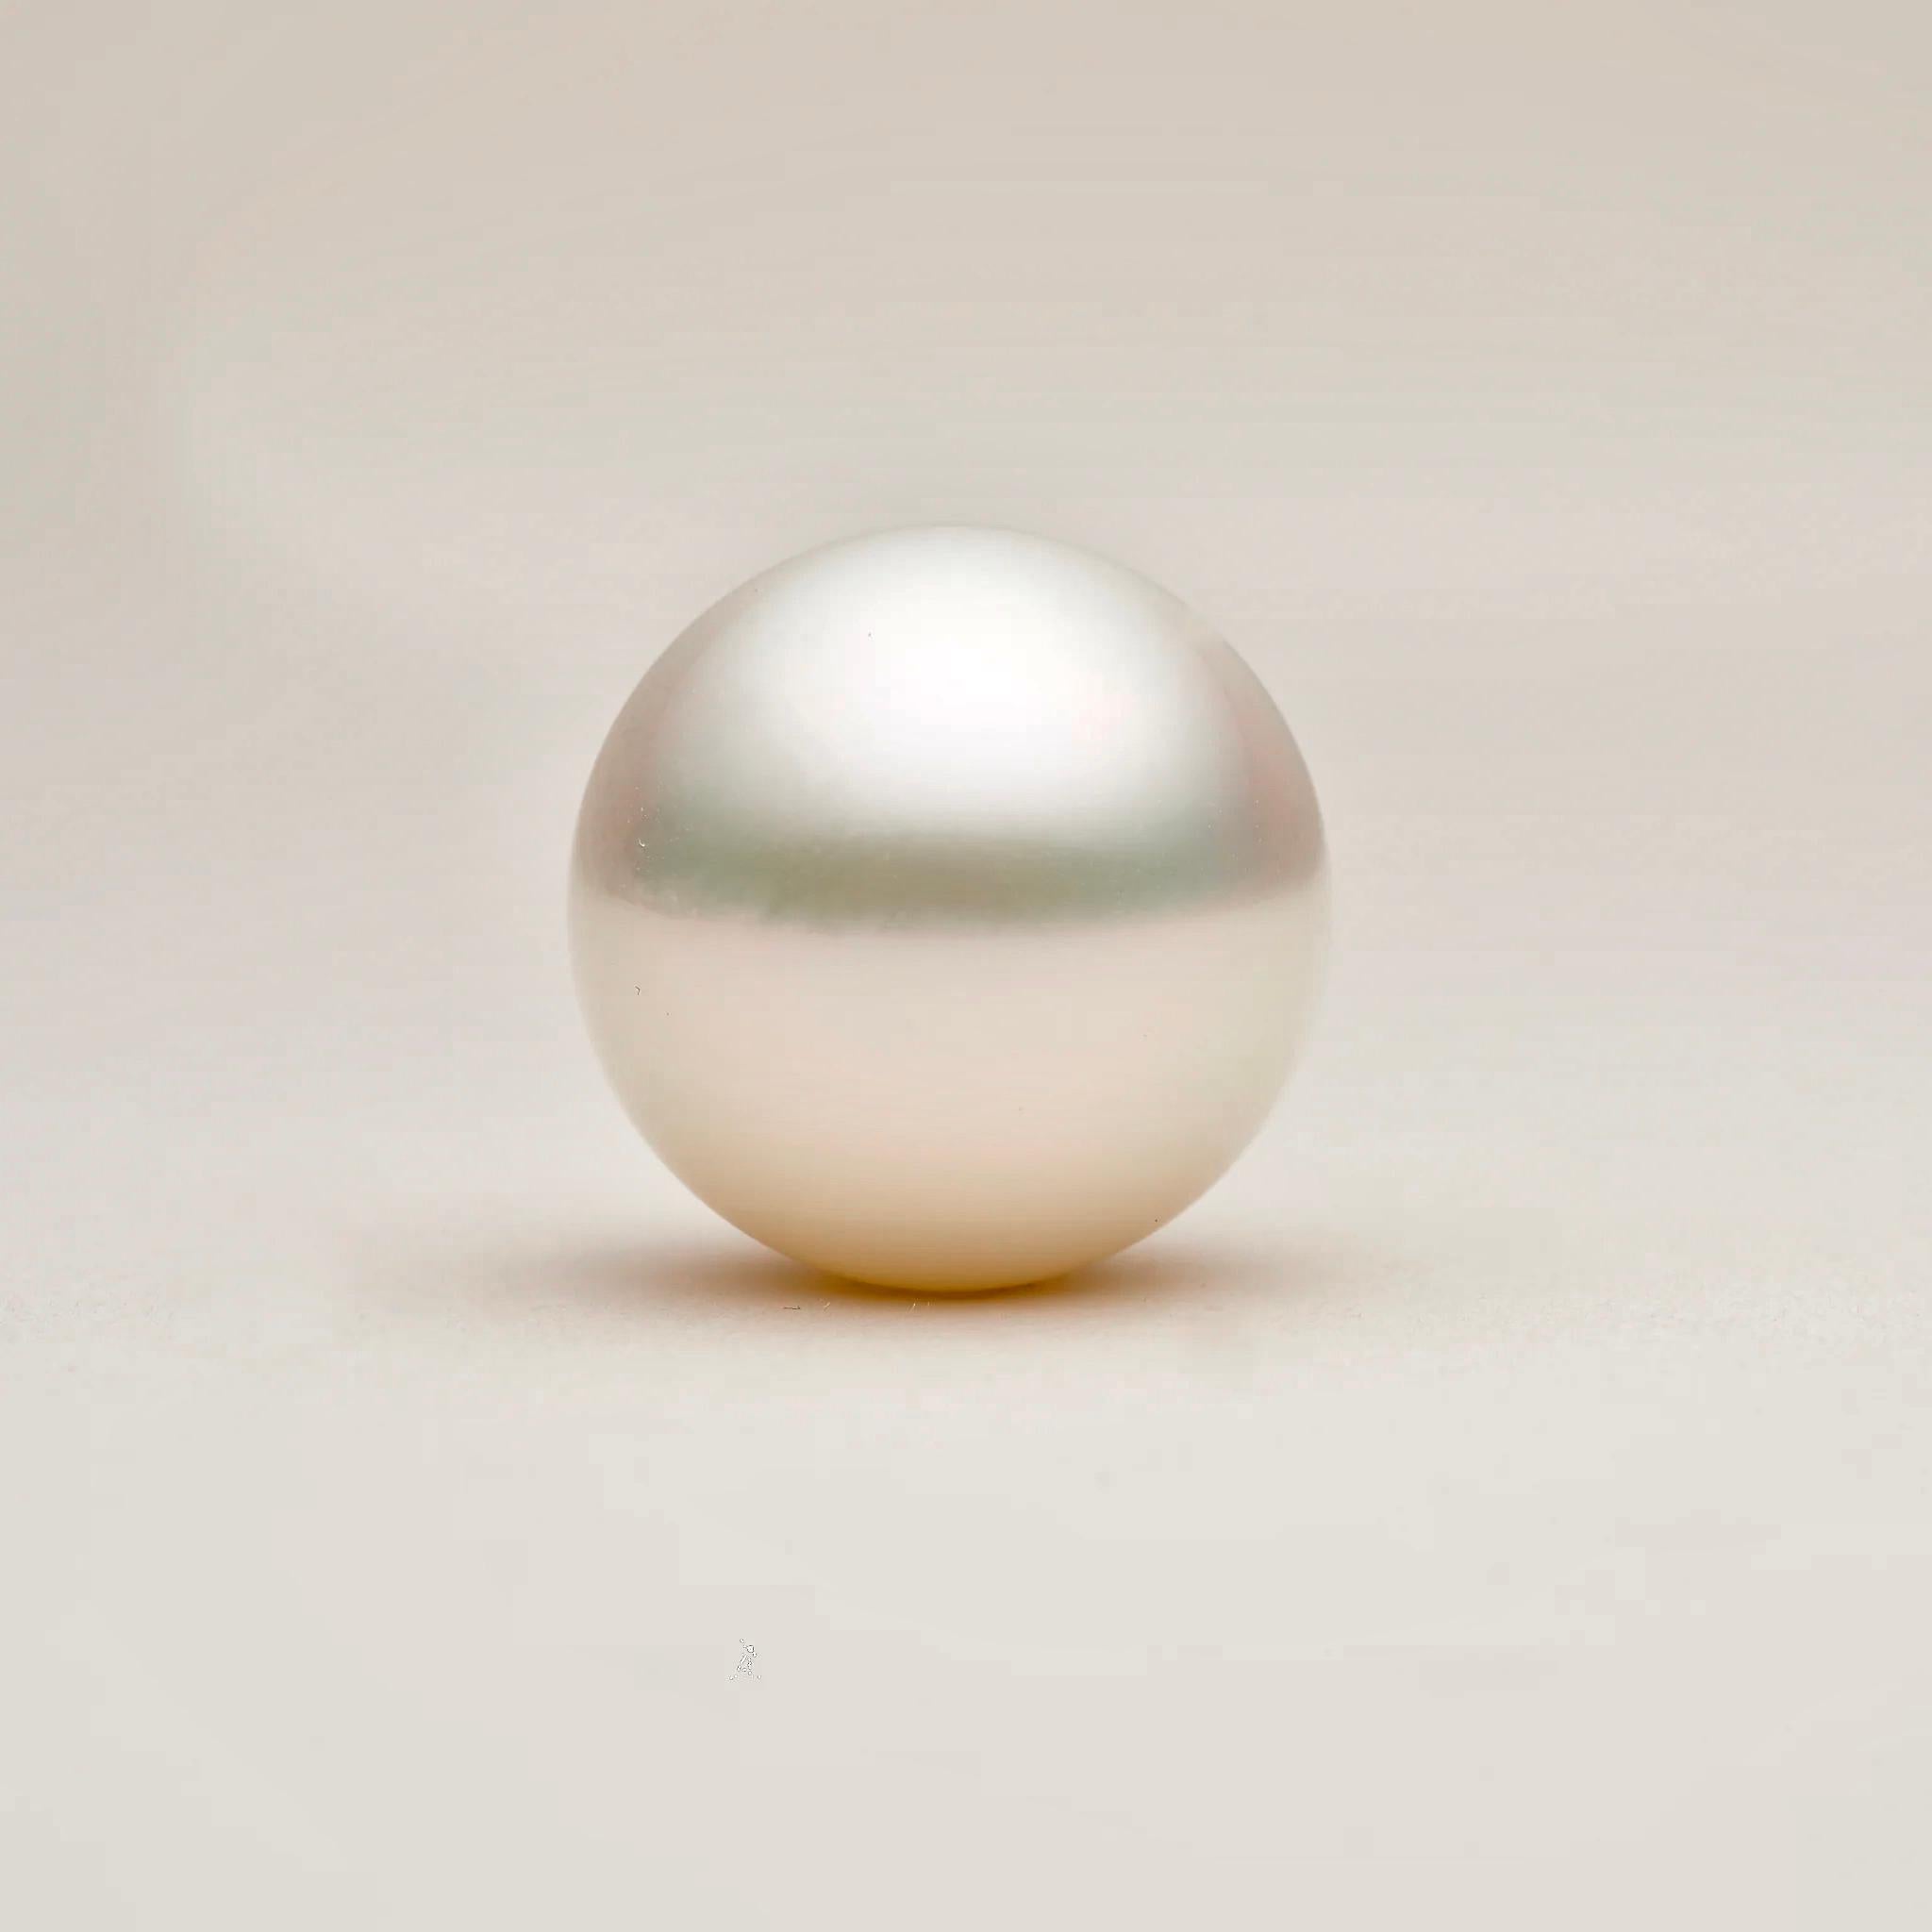 SINGLE ROUND 20 MM PEARL, FLAWLESS AFTER SETTING COMPLEXION, AAA/AA LUSTRE, WHITE WITH PINK GREEN OVERTONES.


These pearls display their natural colour and lustre and have not been subjected to chemical enhancements or